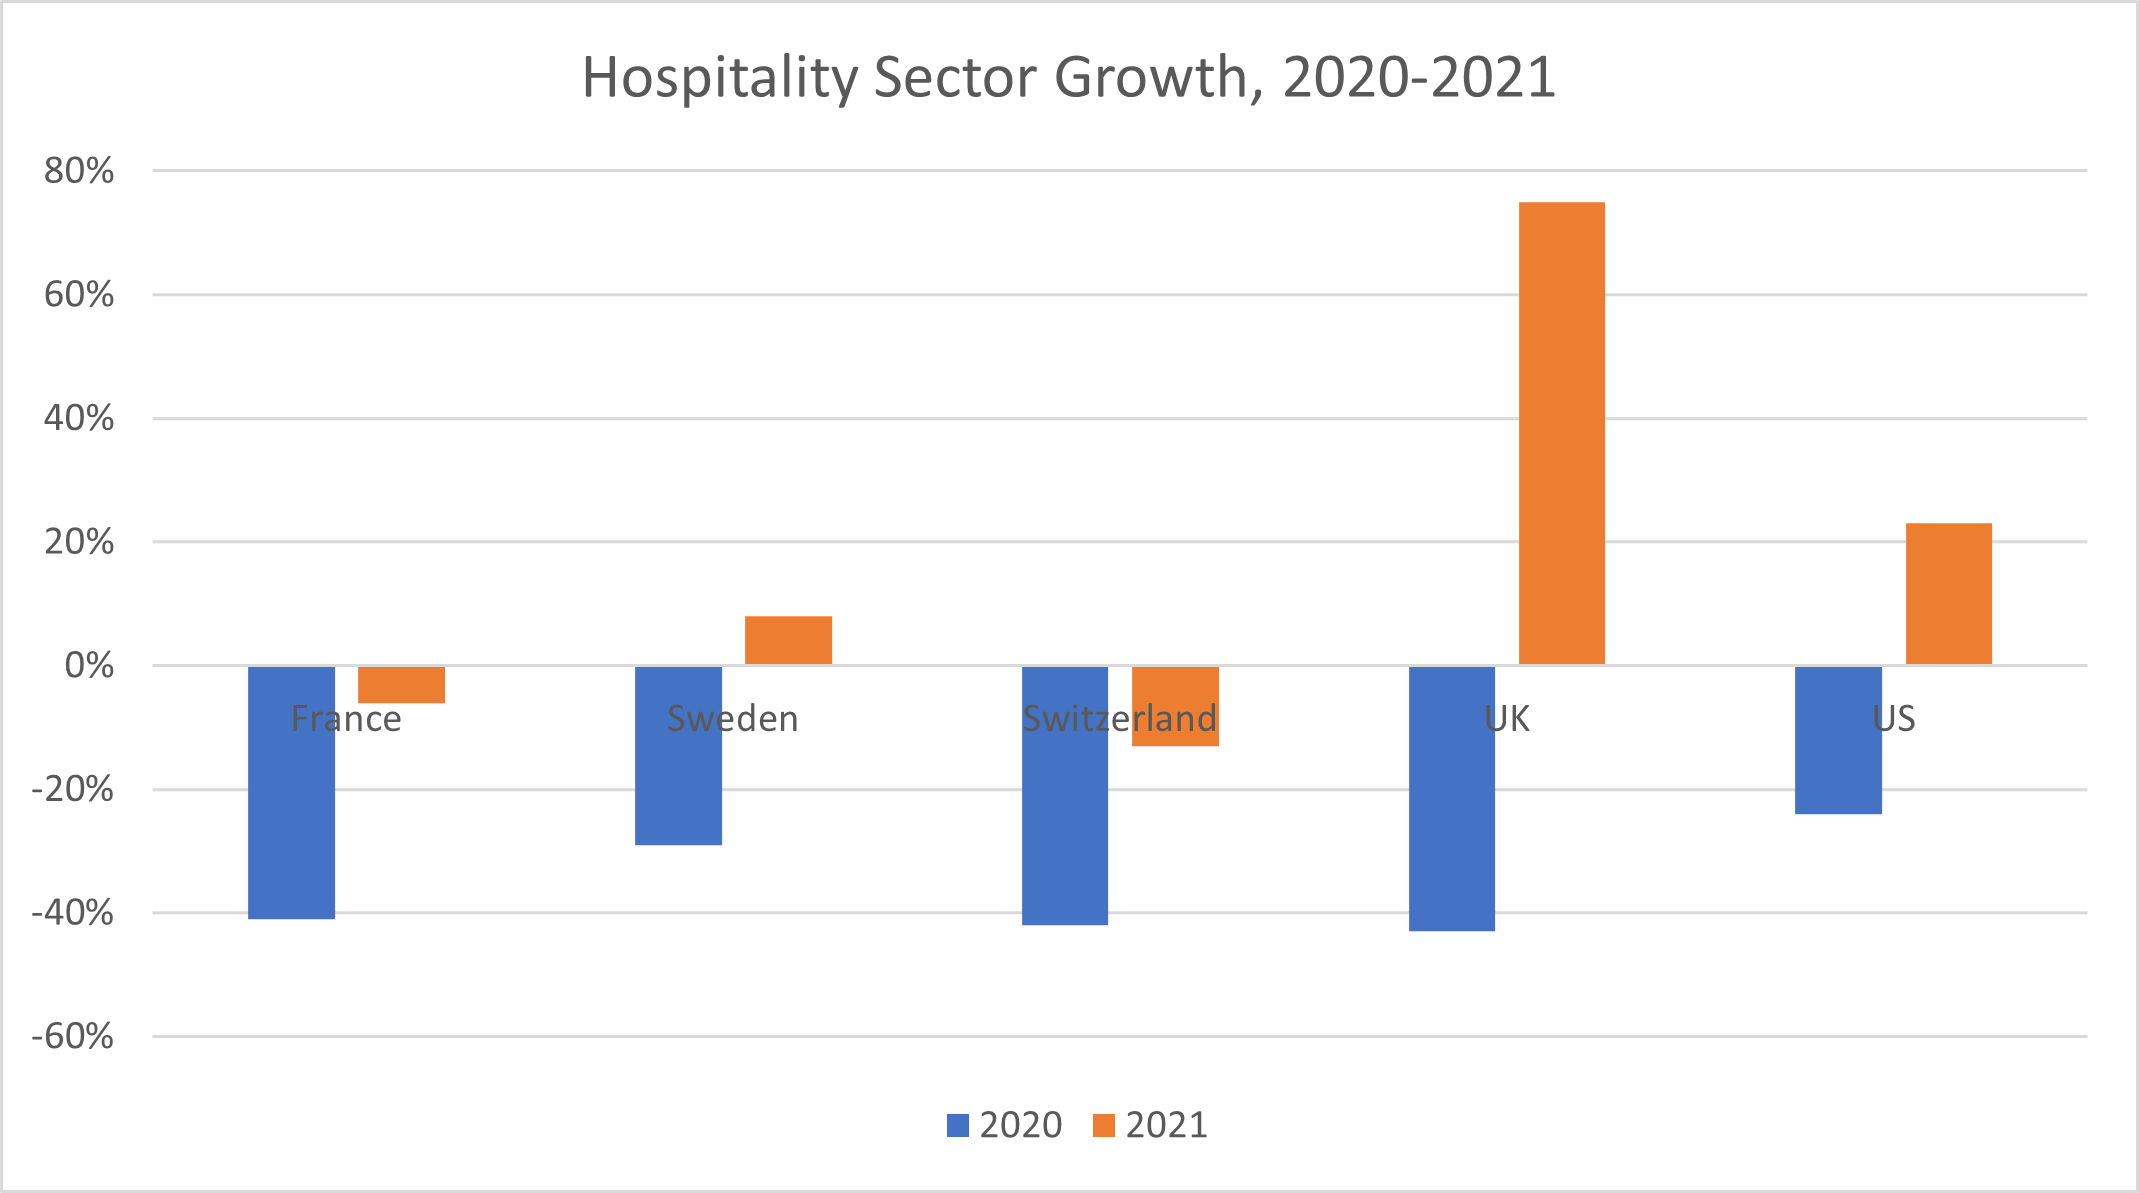 Hospitality Sector growth rates by country, in 2020-2021